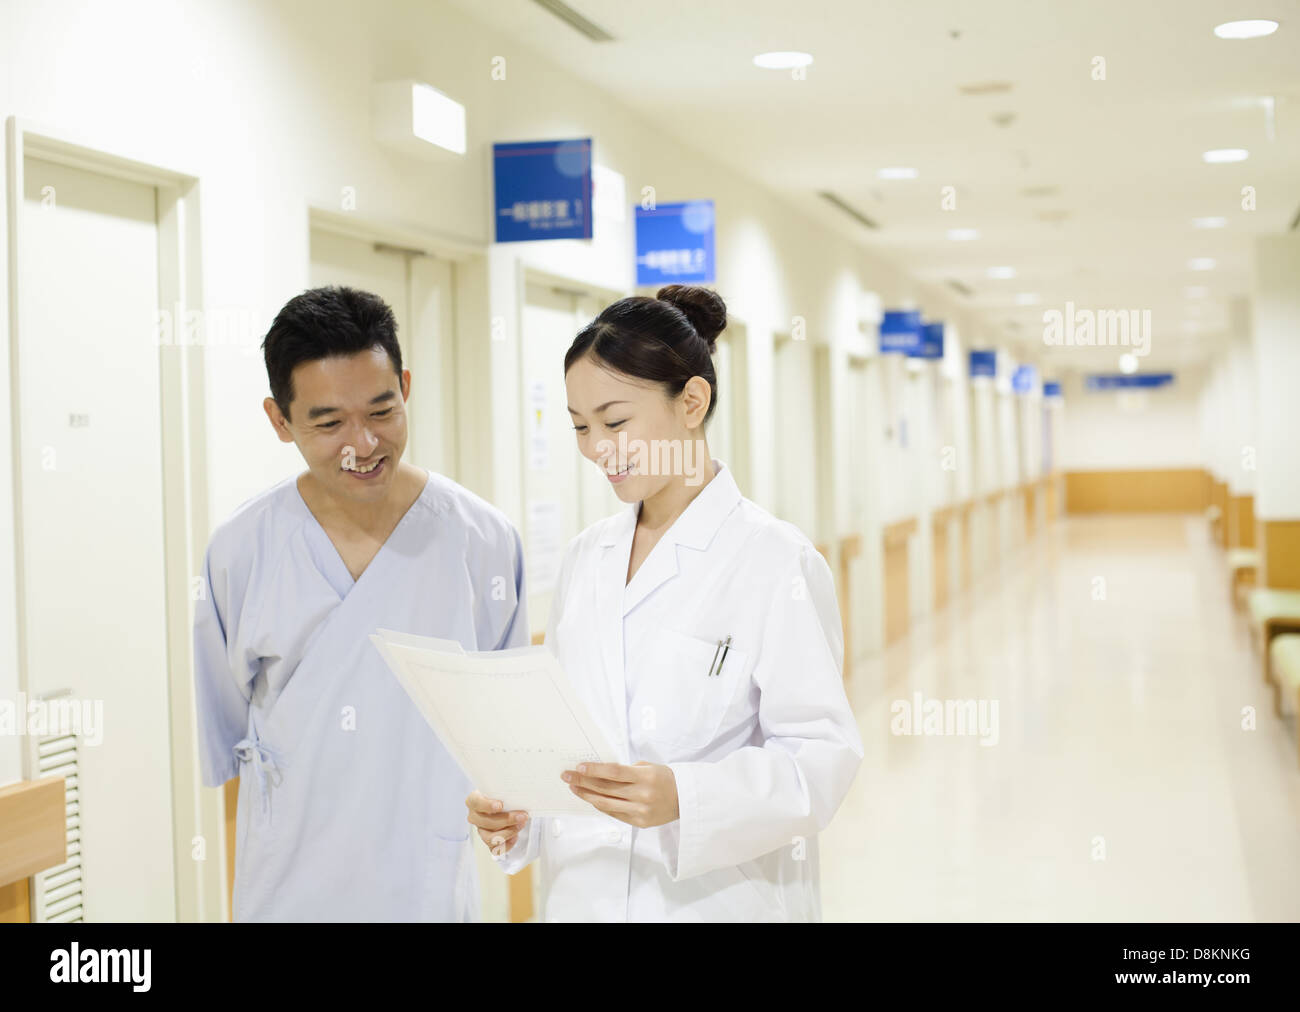 Medical technologist and a patient talking in corridor Stock Photo